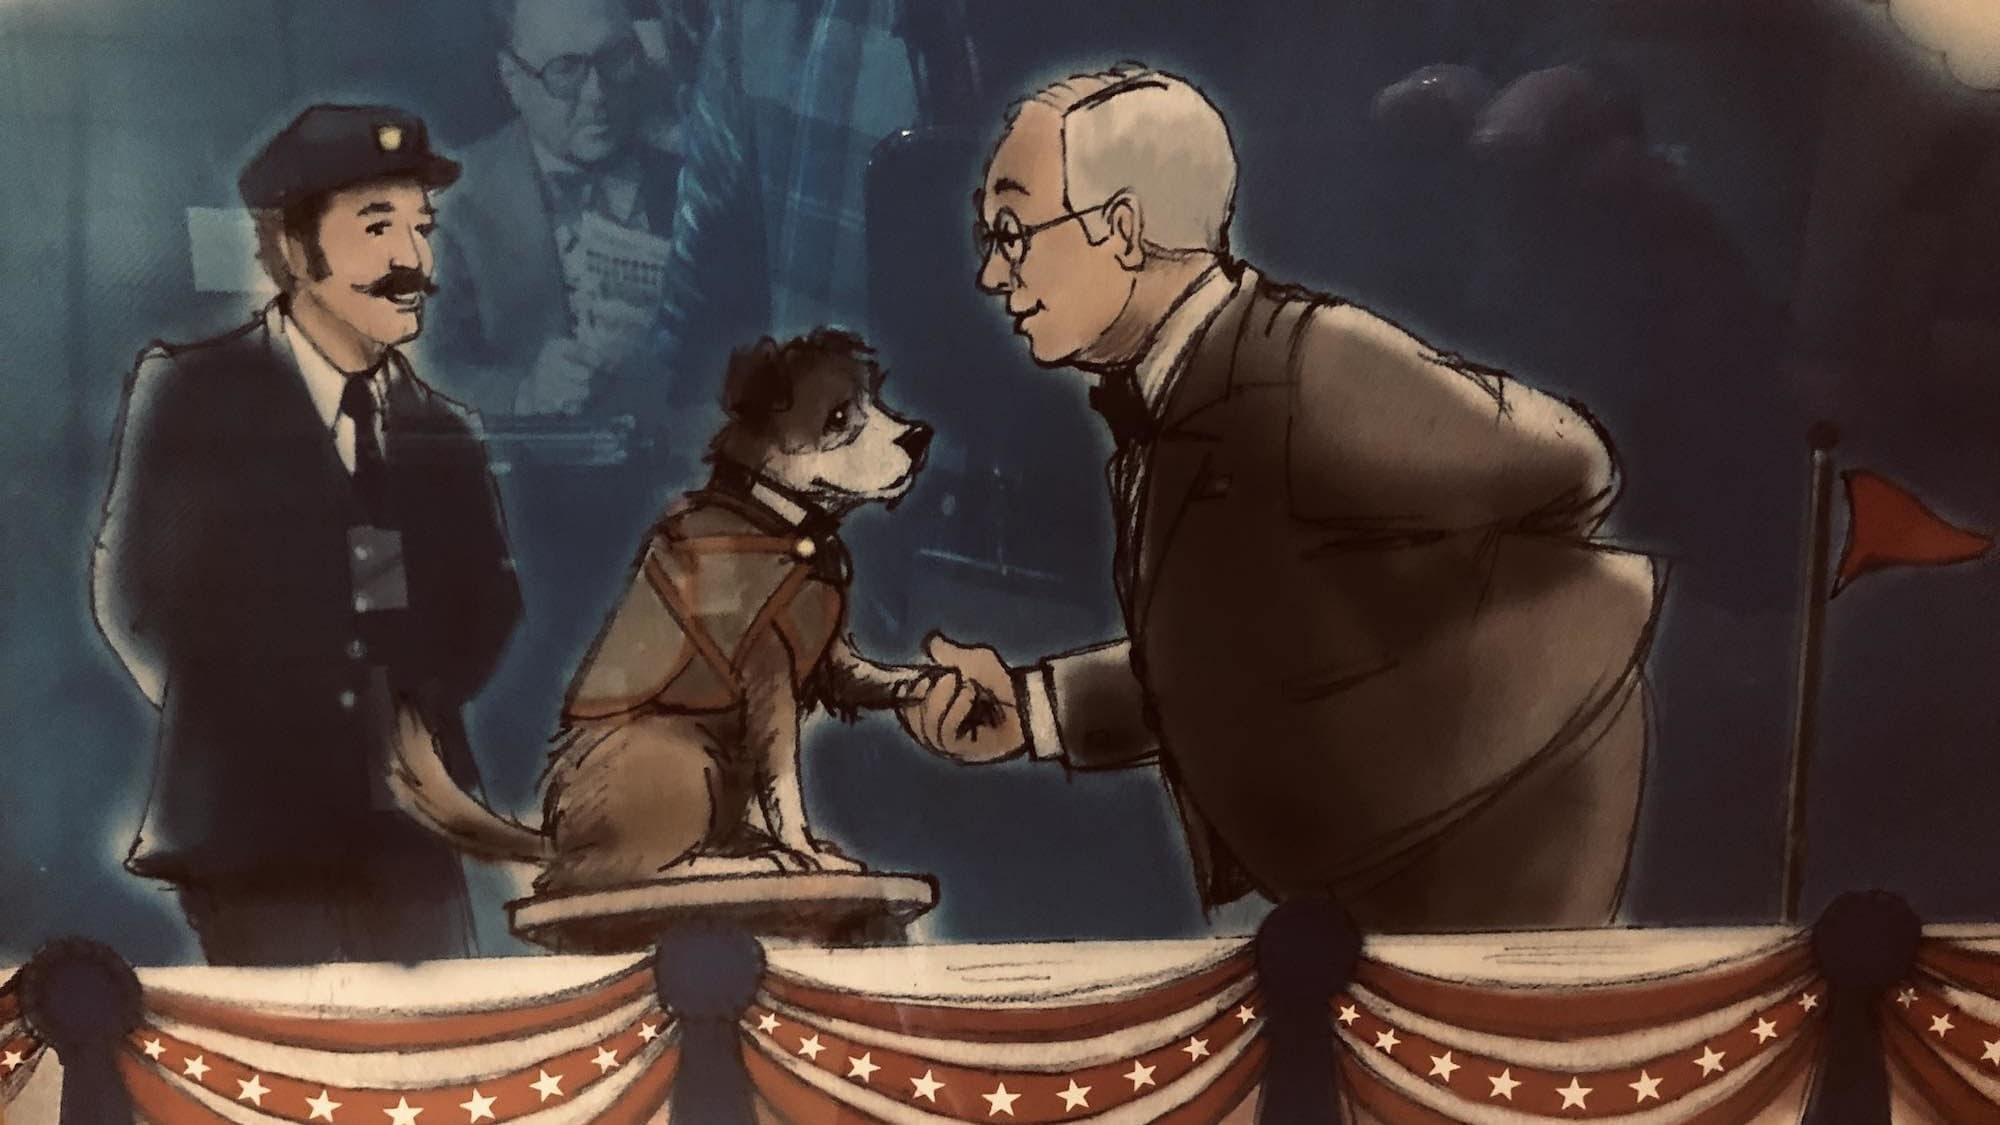 Dog shaking hands with person illustration